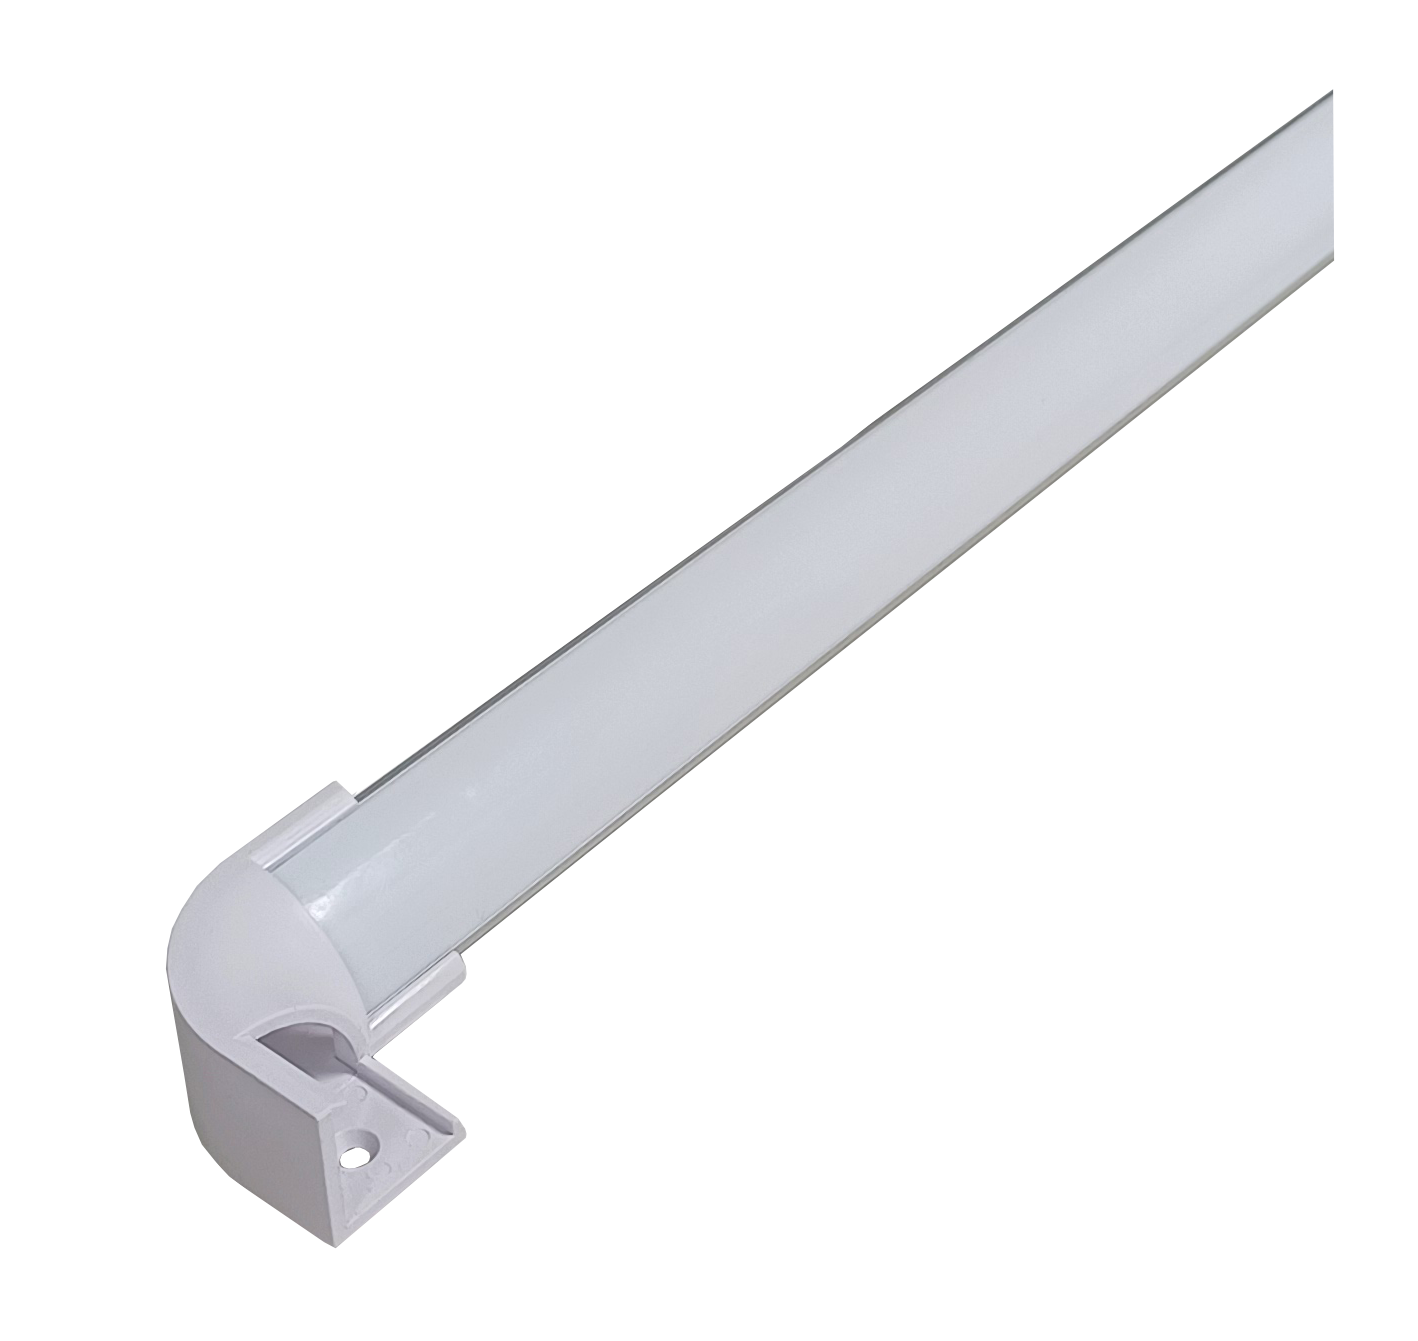 LED Extrusion - A13 Corner Joiner (Launch Special) - Future Light - LED Lights South Africa